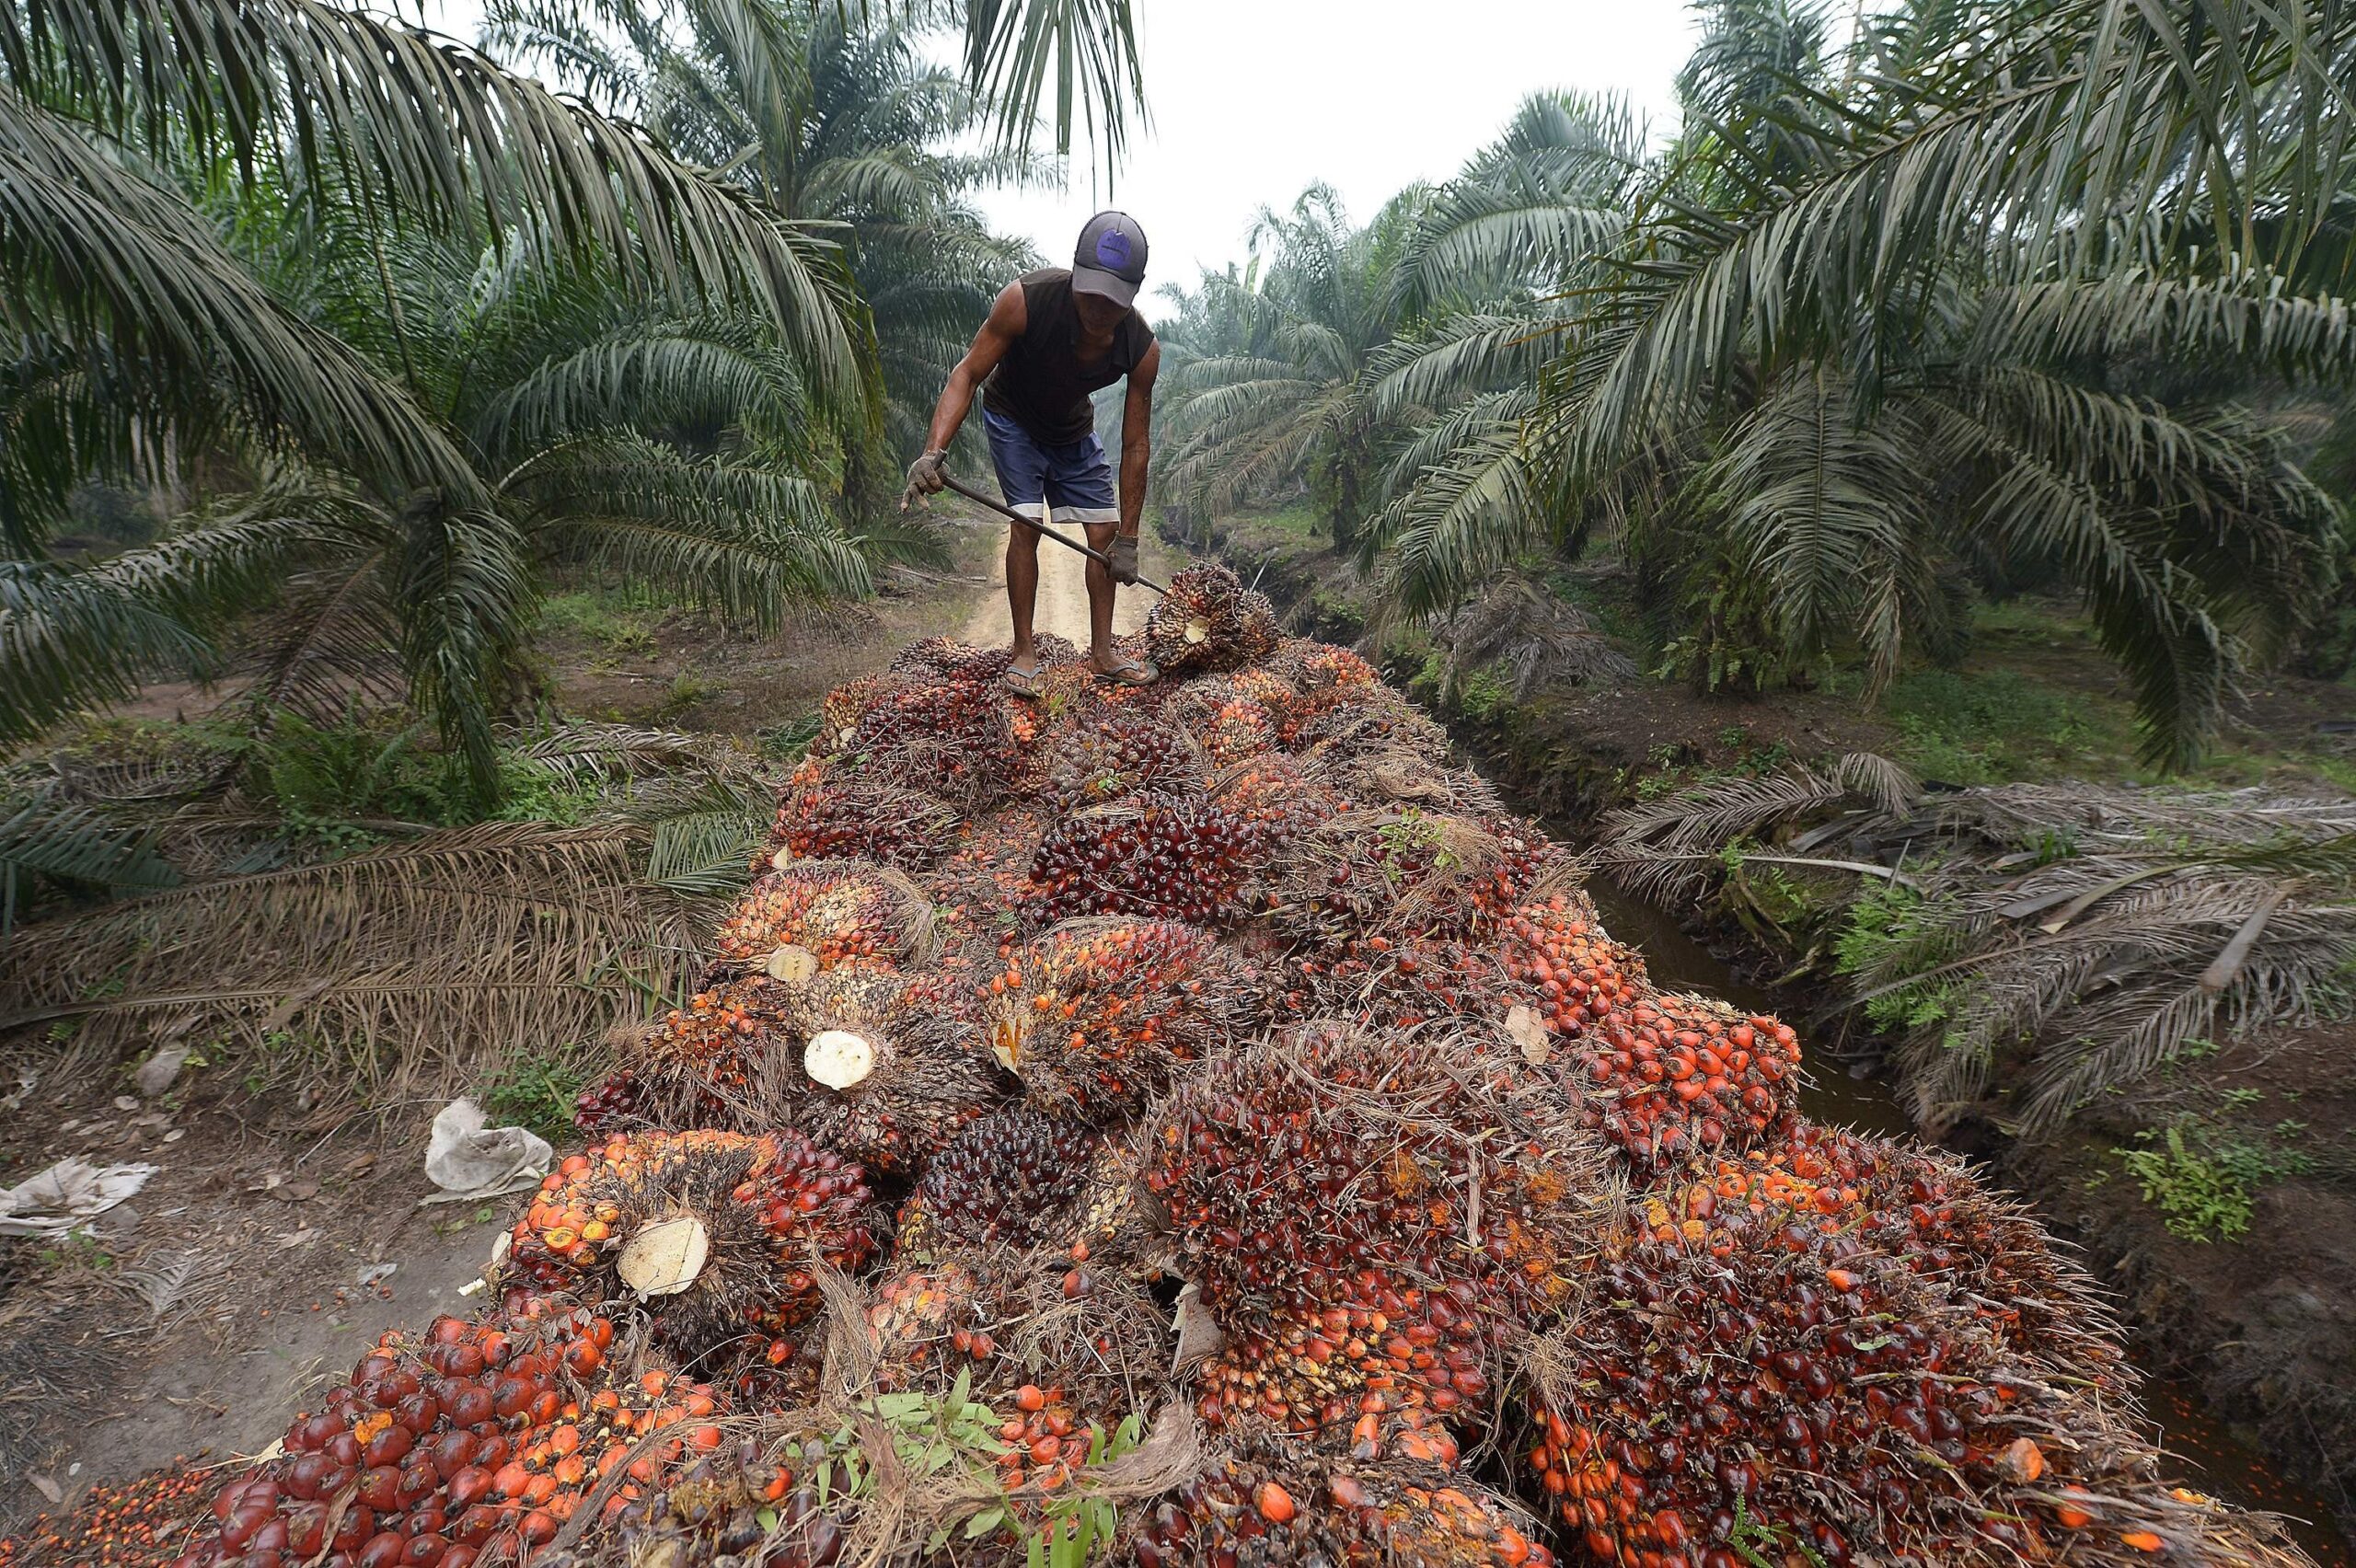 Indonesia Looks for New Markets for Oil and Palm Oil